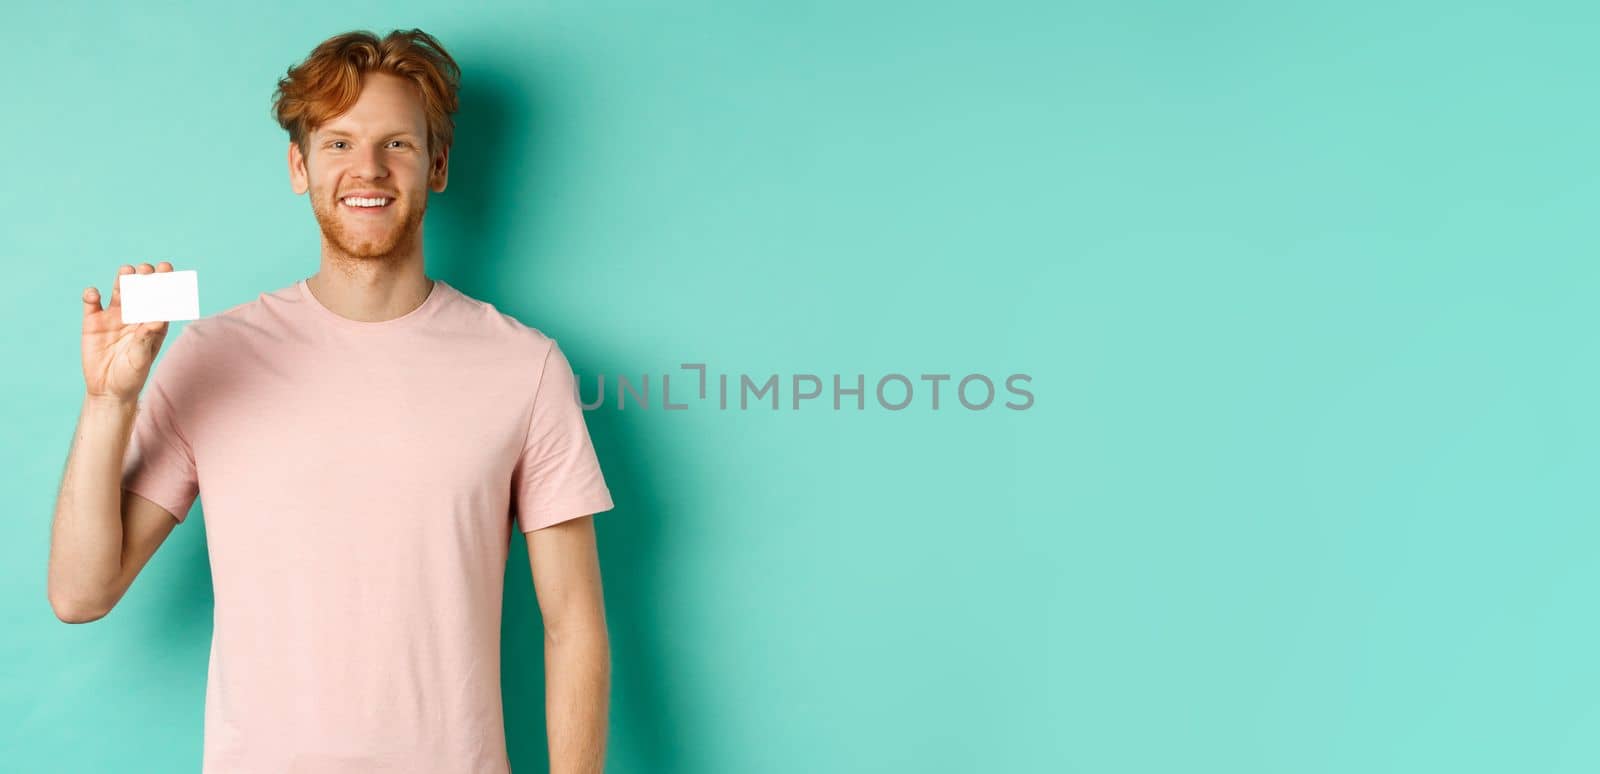 Handsome young man smiling and showing plastic credit card, standing in t-shirt against turquoise background.